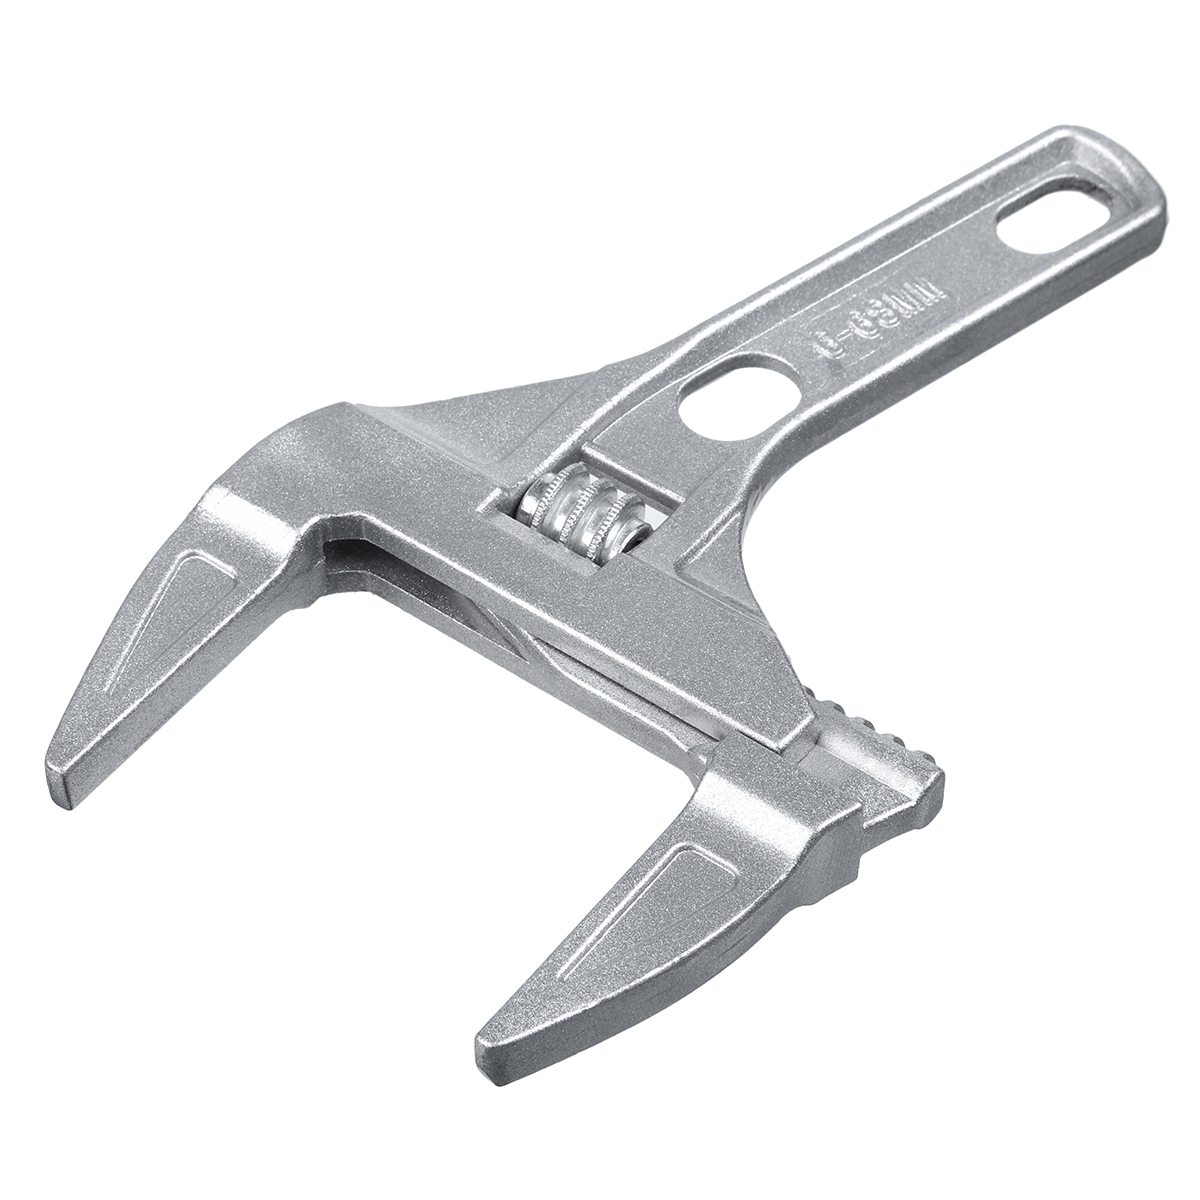 Adjustable-Spanner-16-68mm-Big-Opening-Spanner-Wrench-Mini-Nut-Key-Hand-Tools-Metal-Universal-Spanne-1625089-4